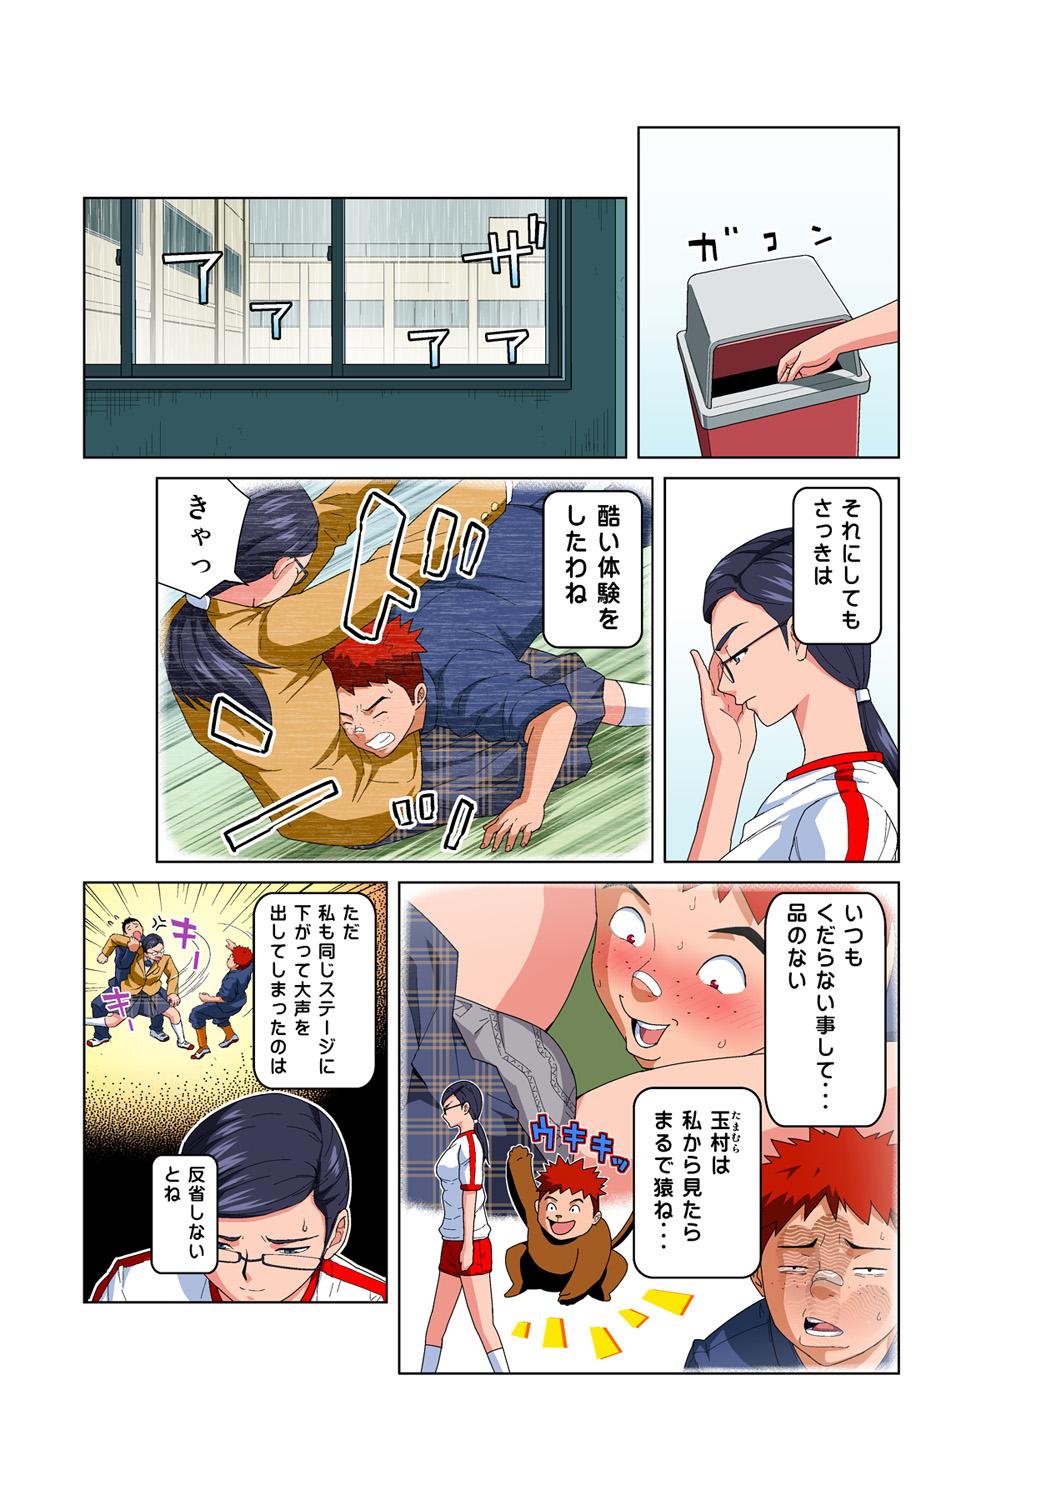 Stretch HiME-Mania Vol. 53 Gay Solo - Page 6